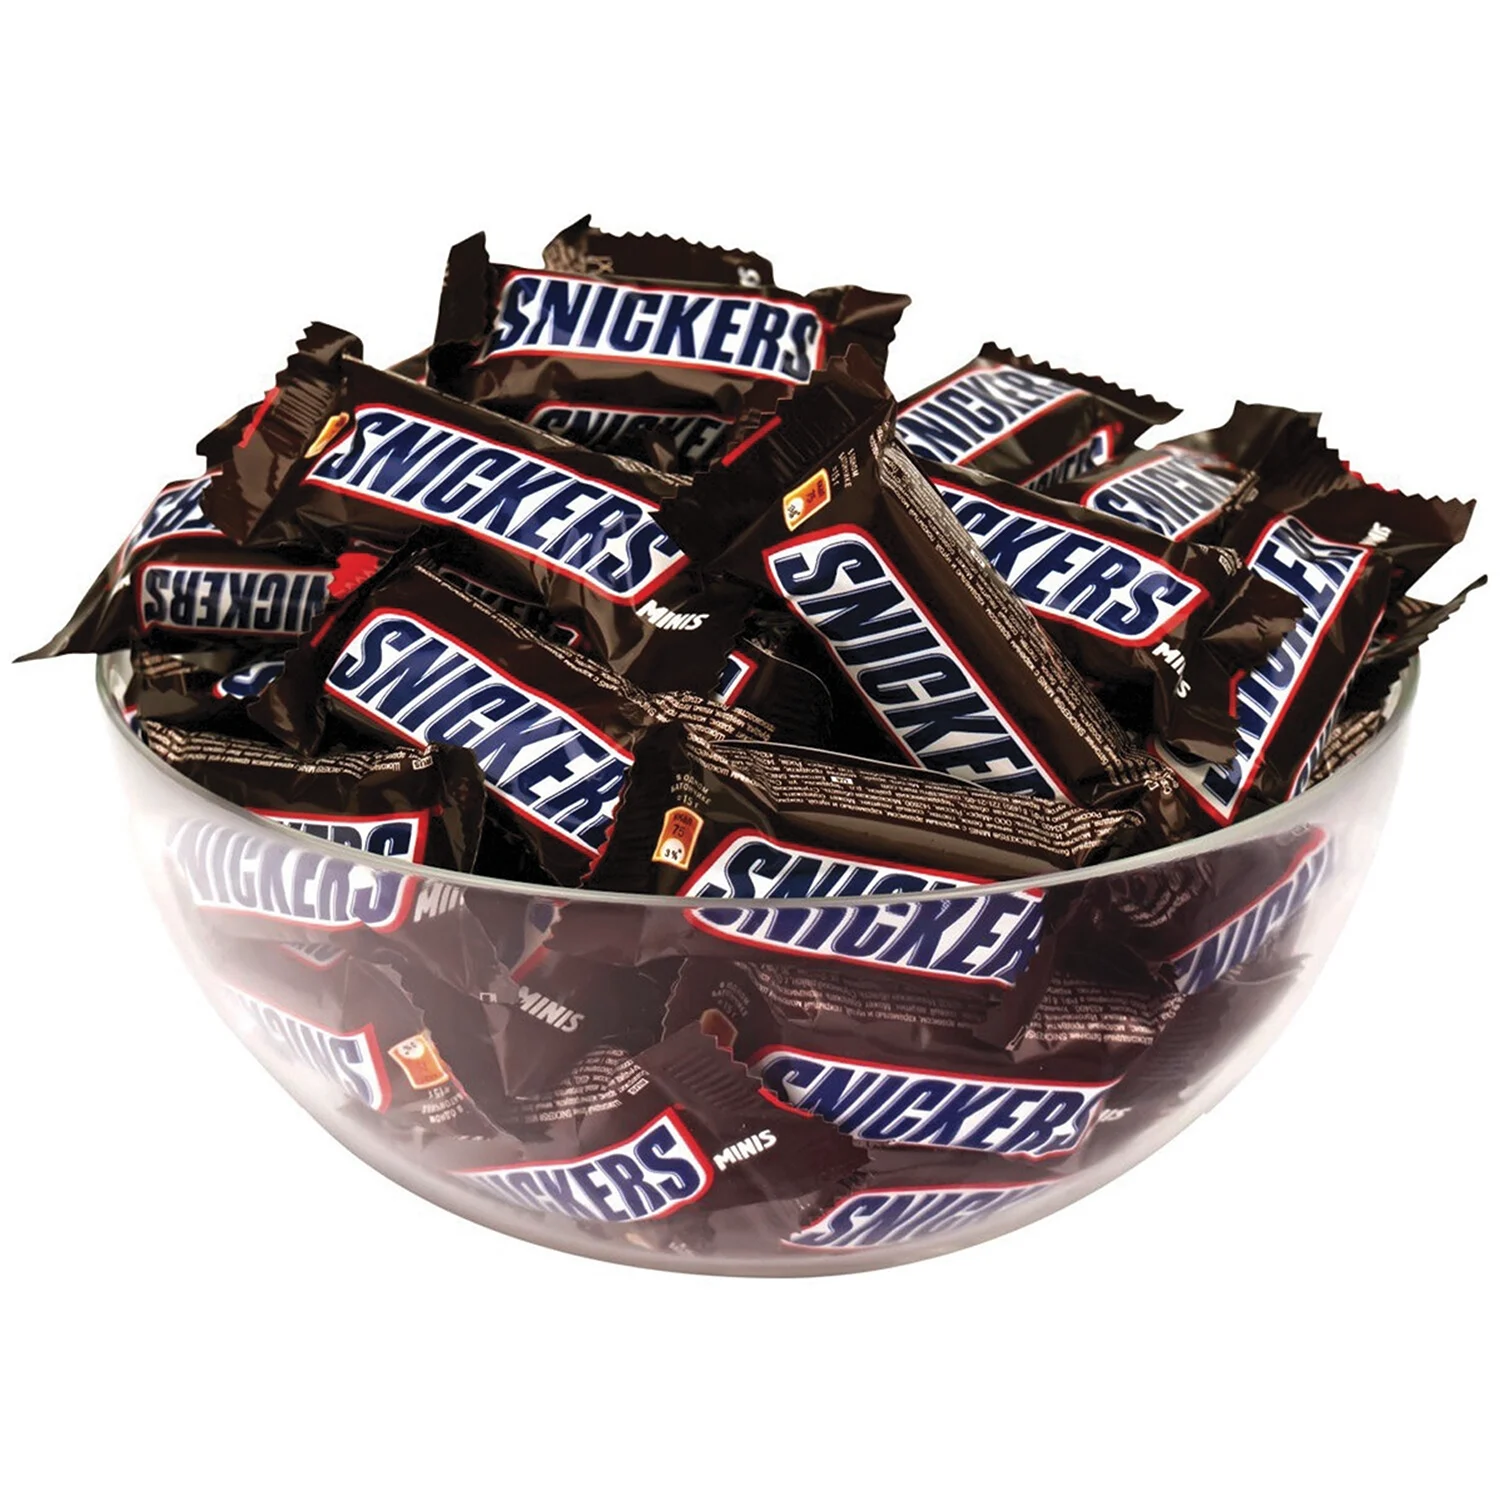 Snickers Minis 1 кг